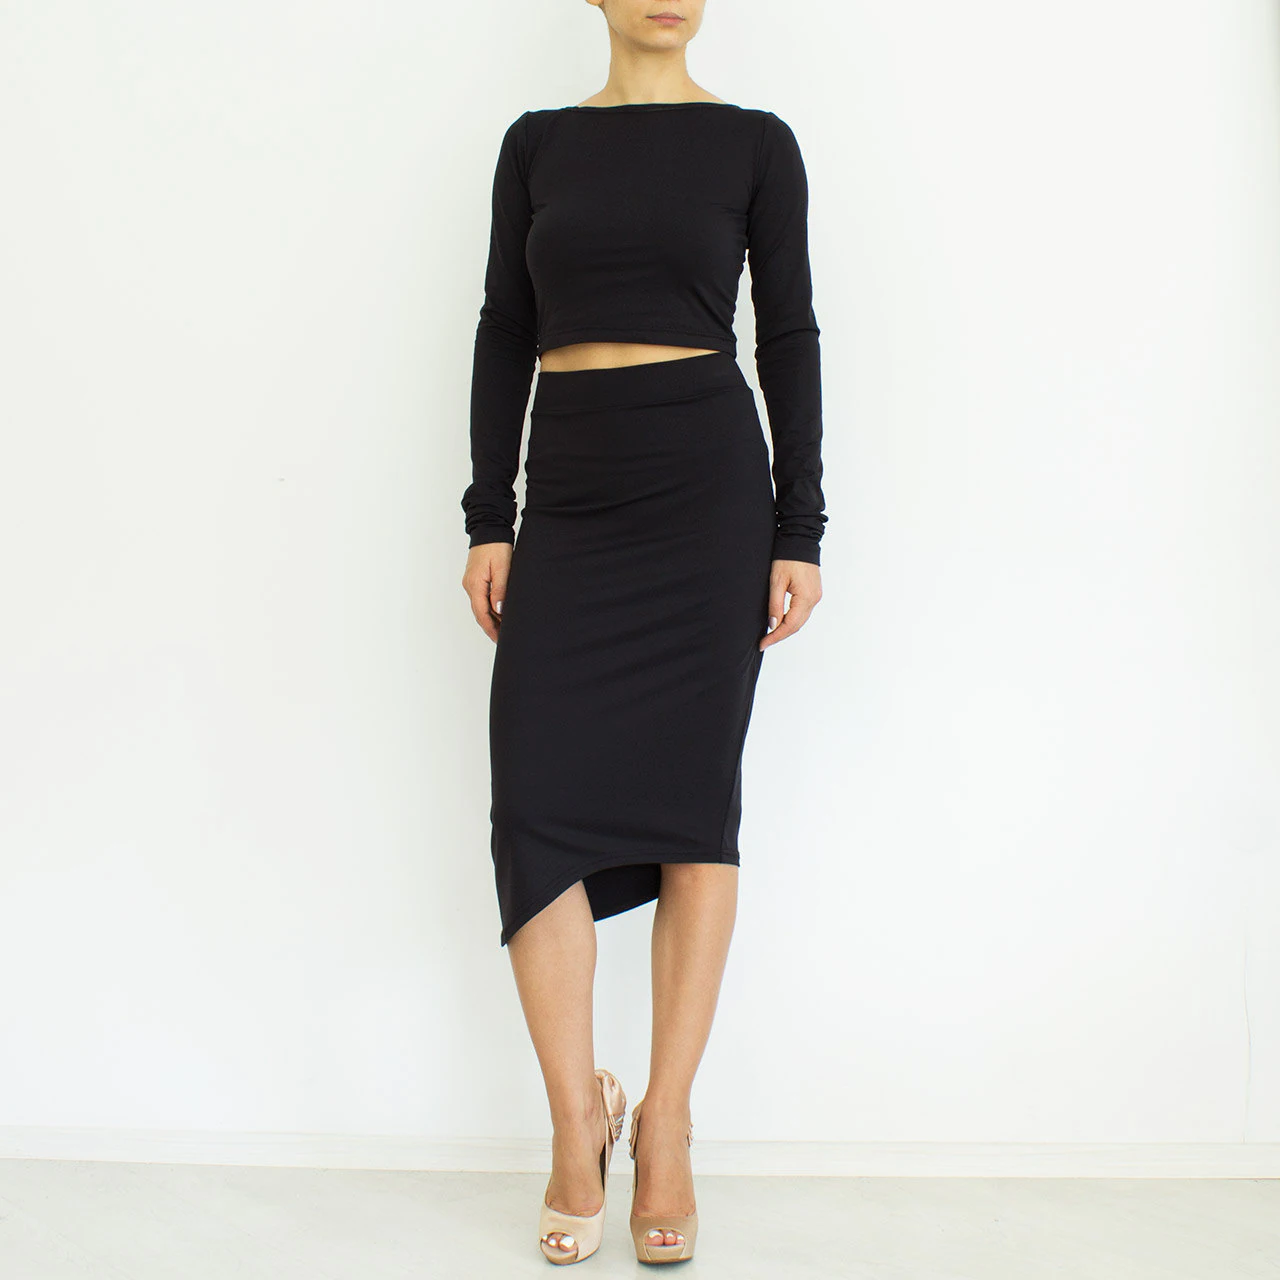 SALE Coordinated set top and skirt, Two piece black dress, Long sleeved crop top, pencil skirt, Coords, Sexy dress, Fall fashion, set KYLIE